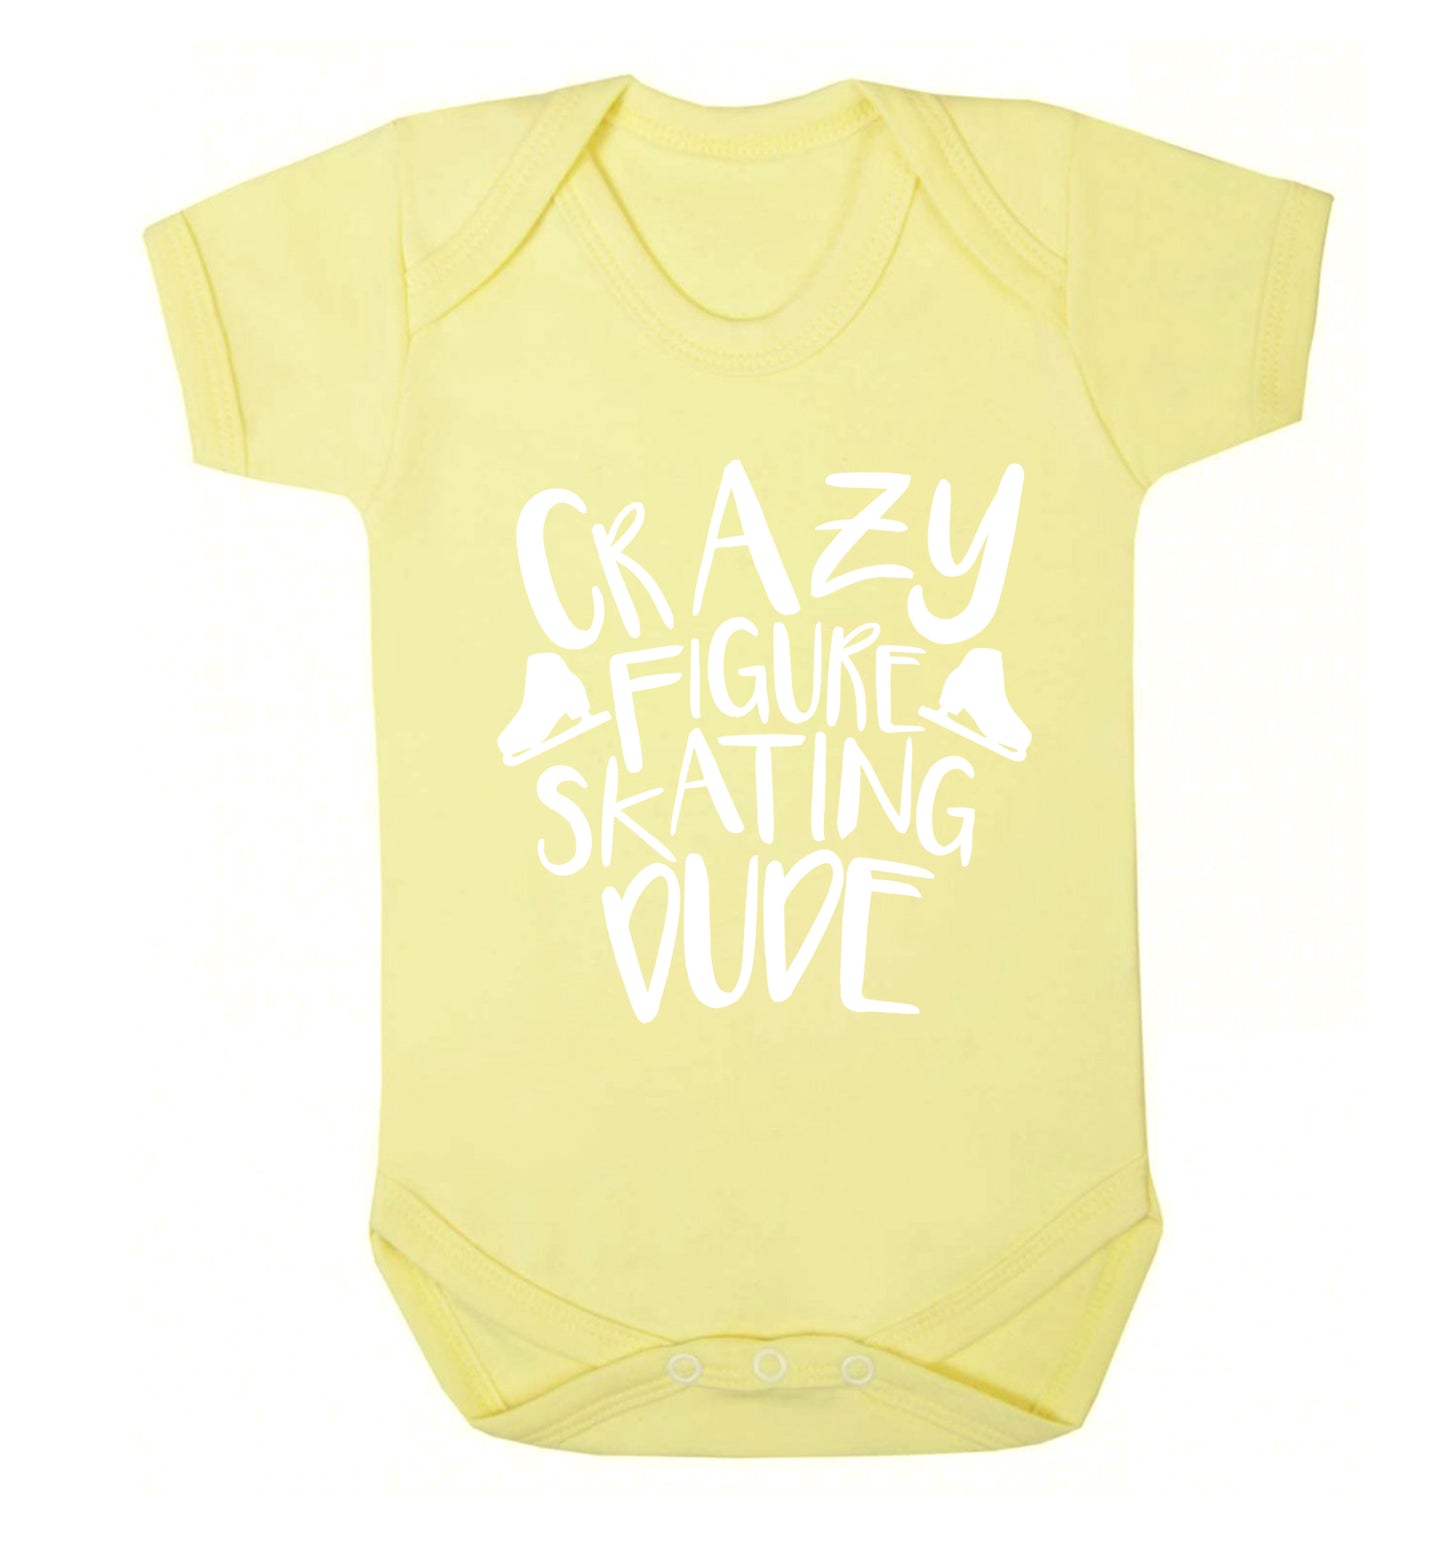 Crazy figure skating dude Baby Vest pale yellow 18-24 months